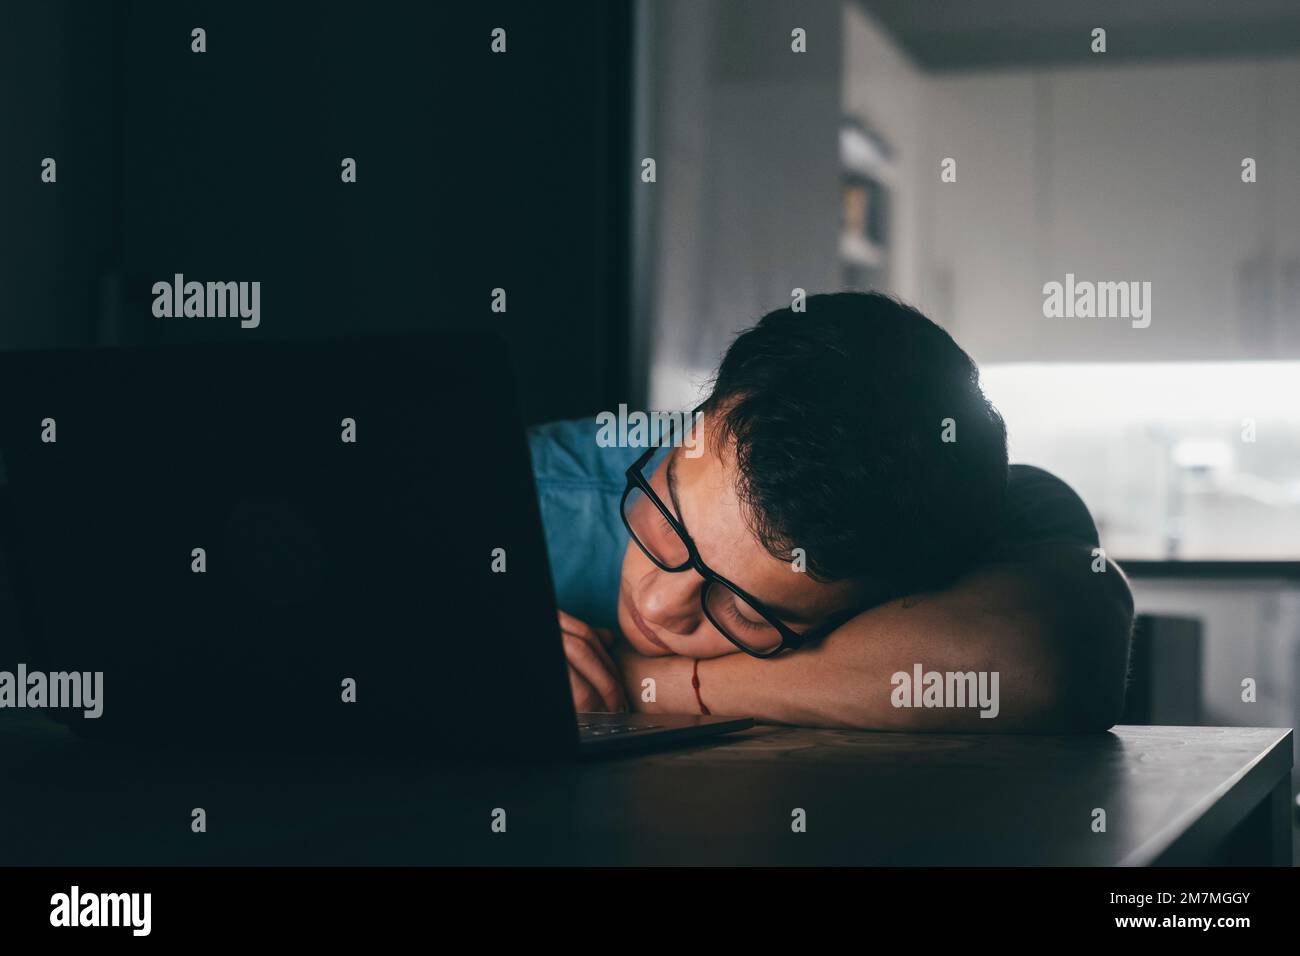 Close up business man put head on folded hands sleeping at workplace at night. Overloaded office employee tired of routine monotony paperwork. Unmotivated worker, insomnia and chronic fatigue syndrome concept Stock Photo